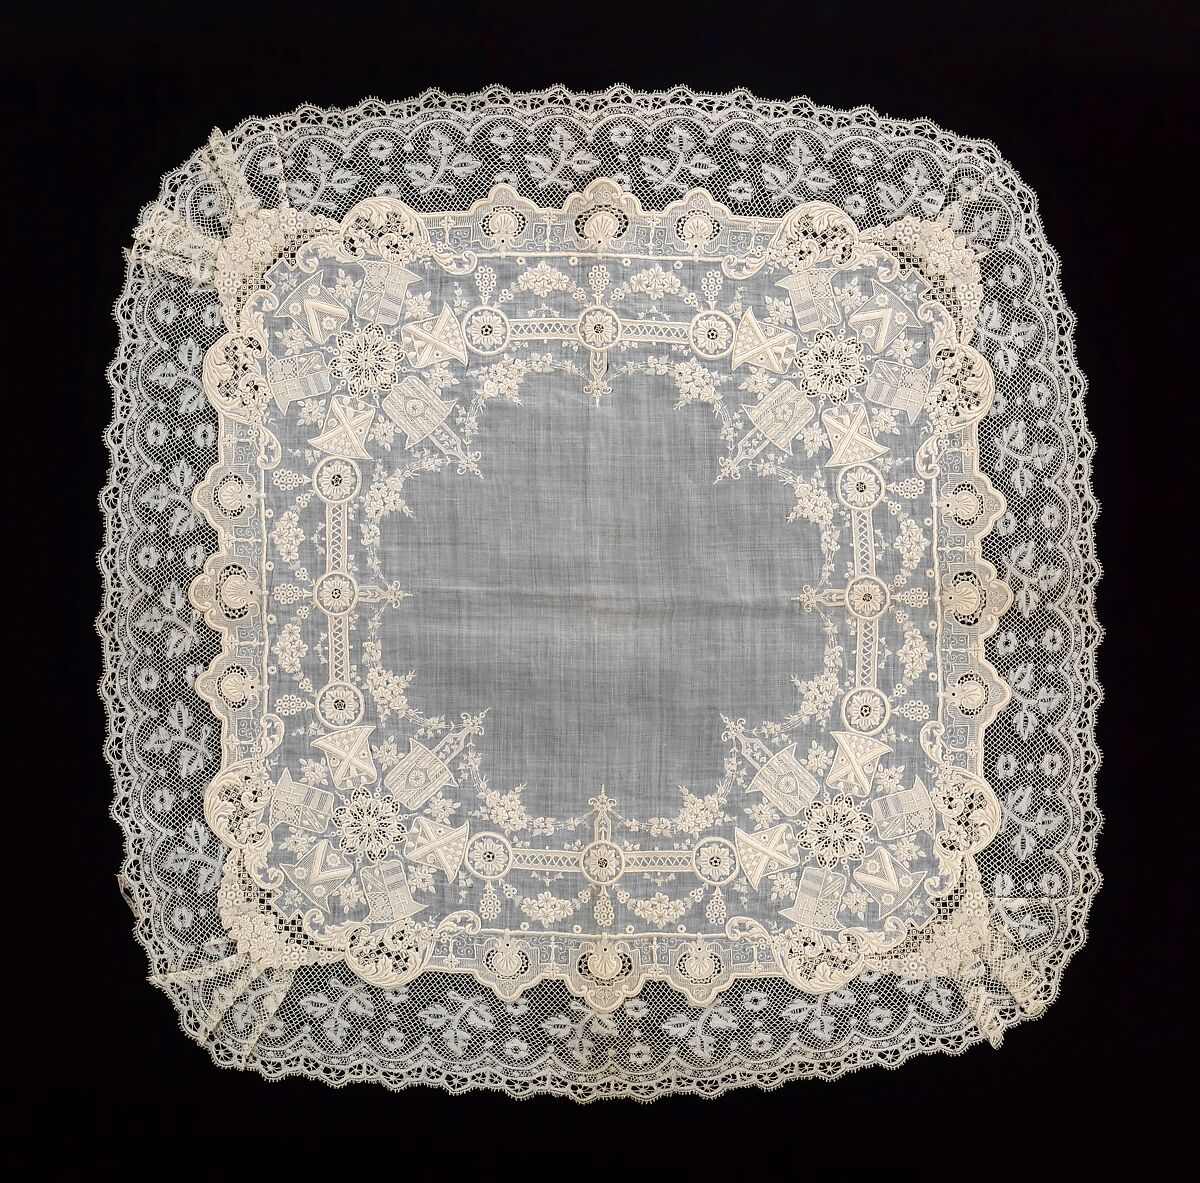 Handkerchief, cotton, linen, probably French 